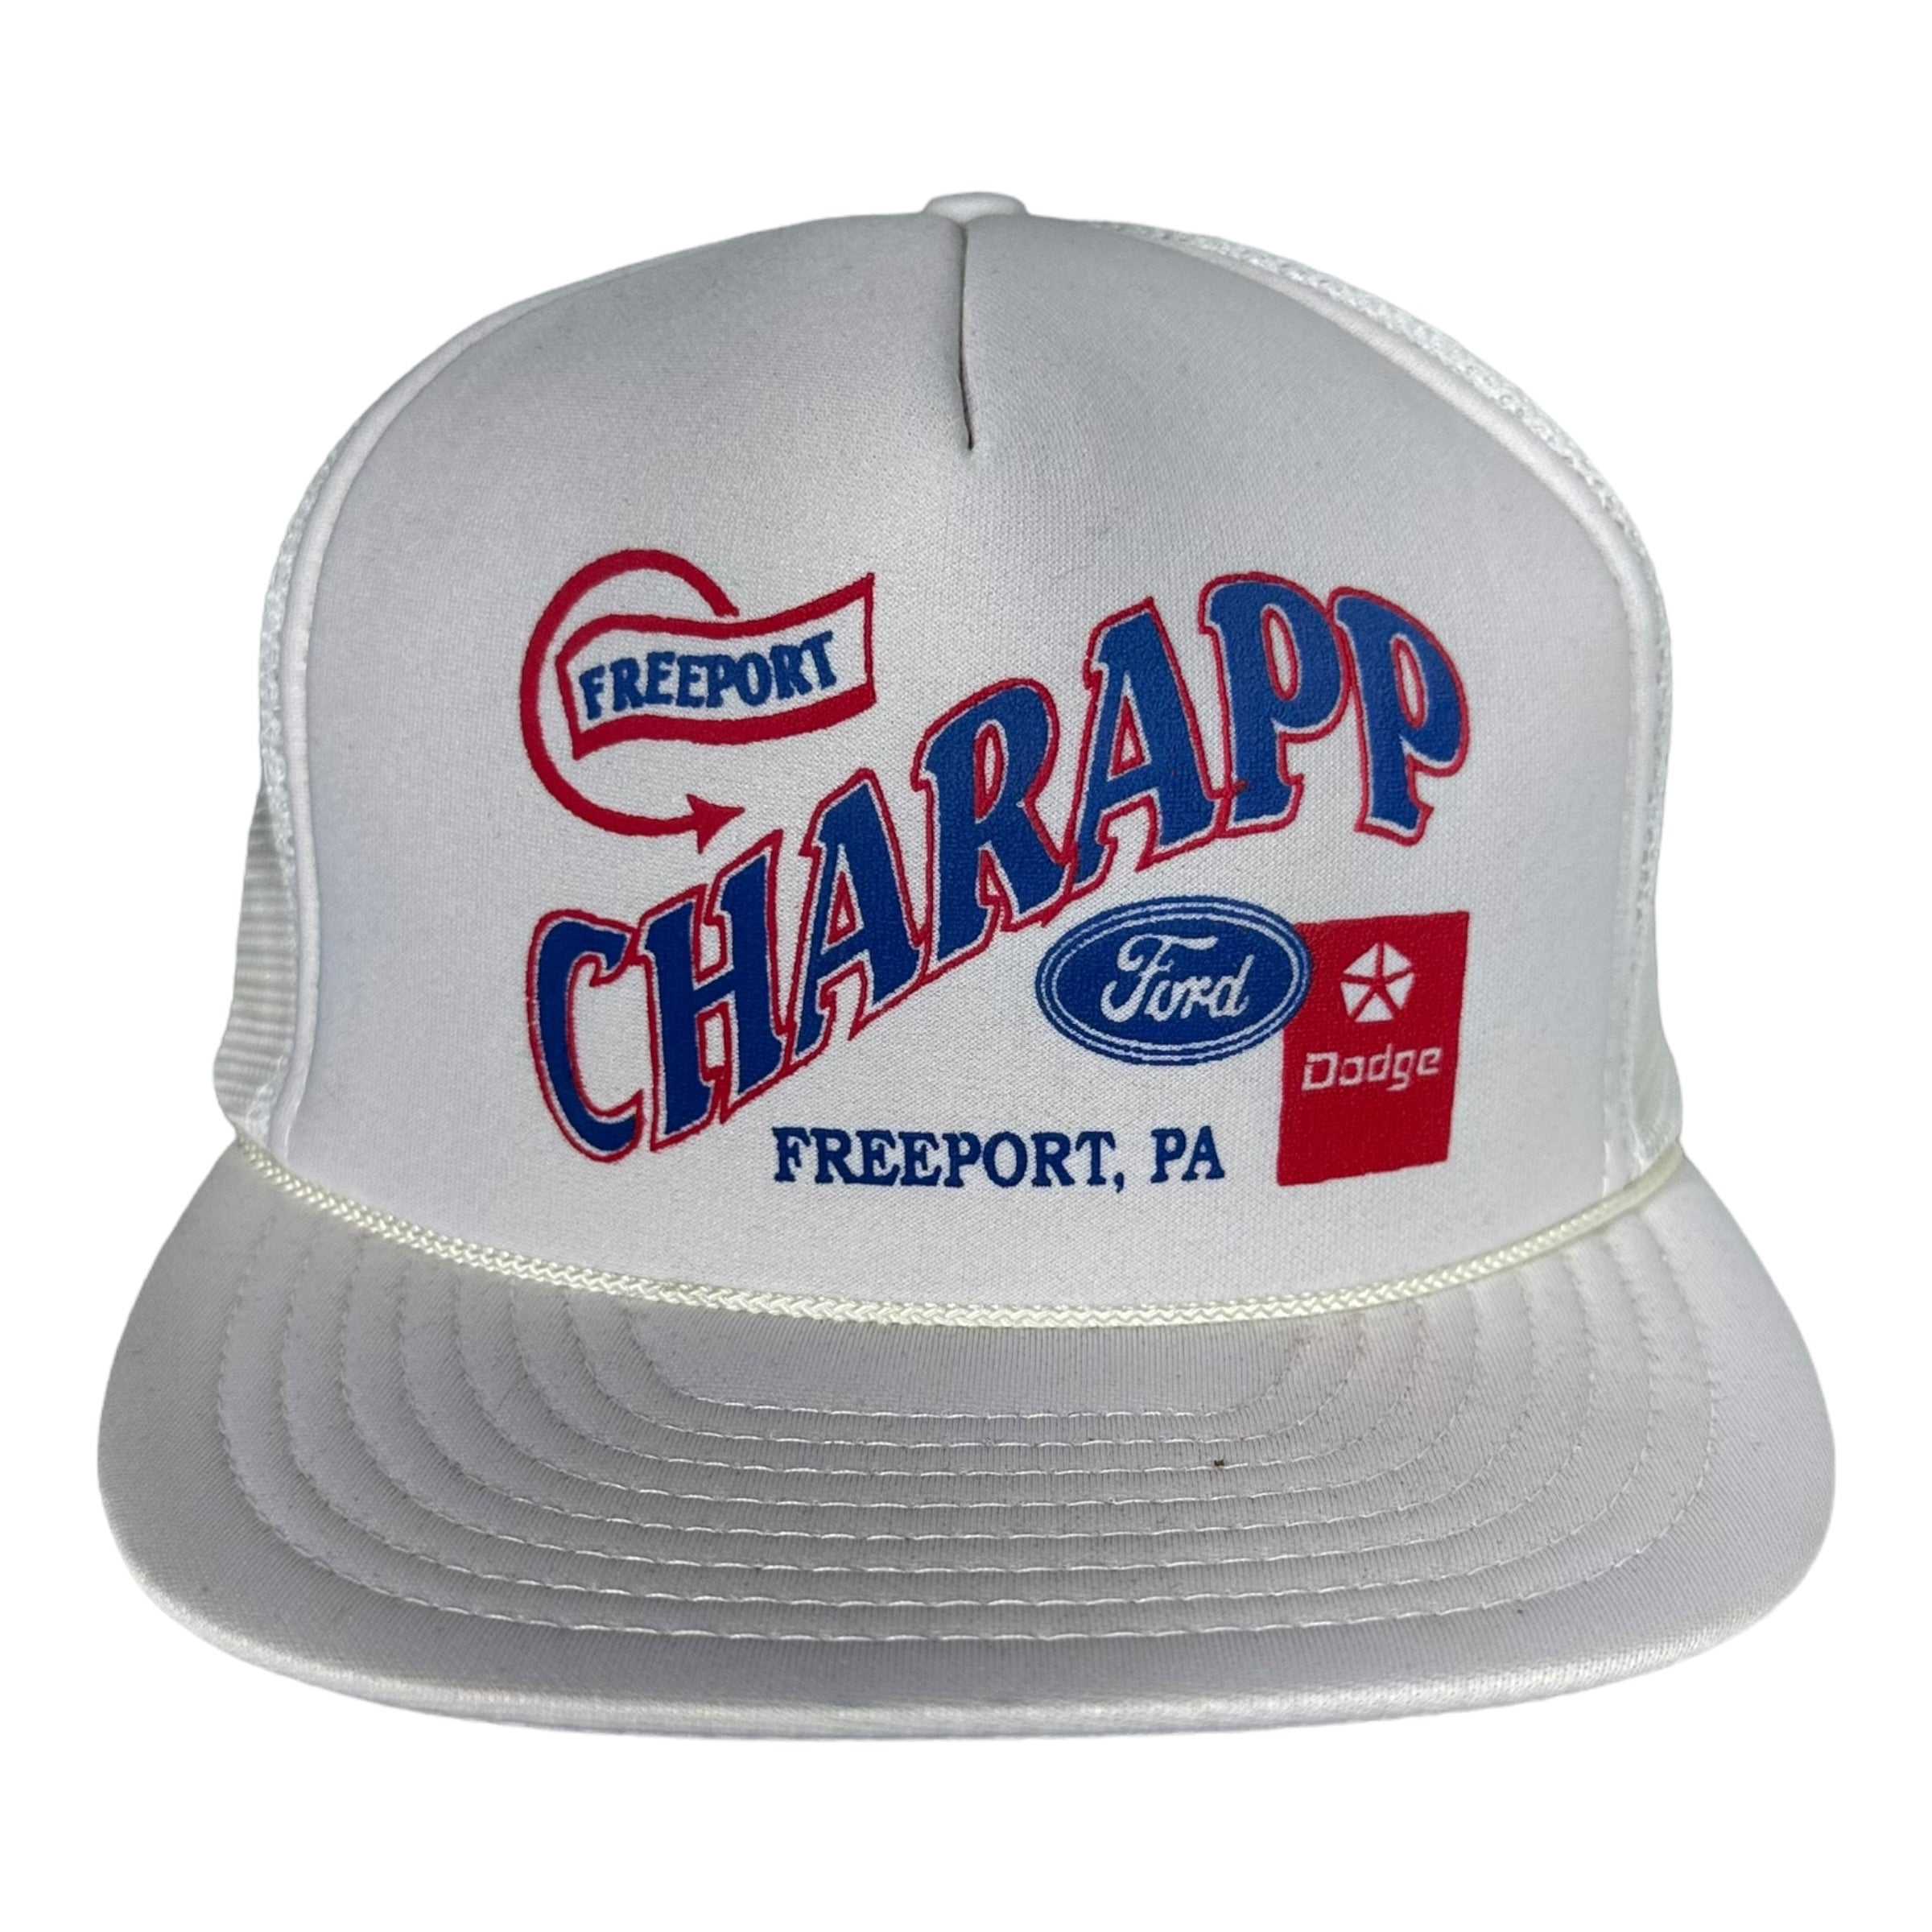 Vintage Charapp Ford Dodge Rope Lace Trucker Snapback